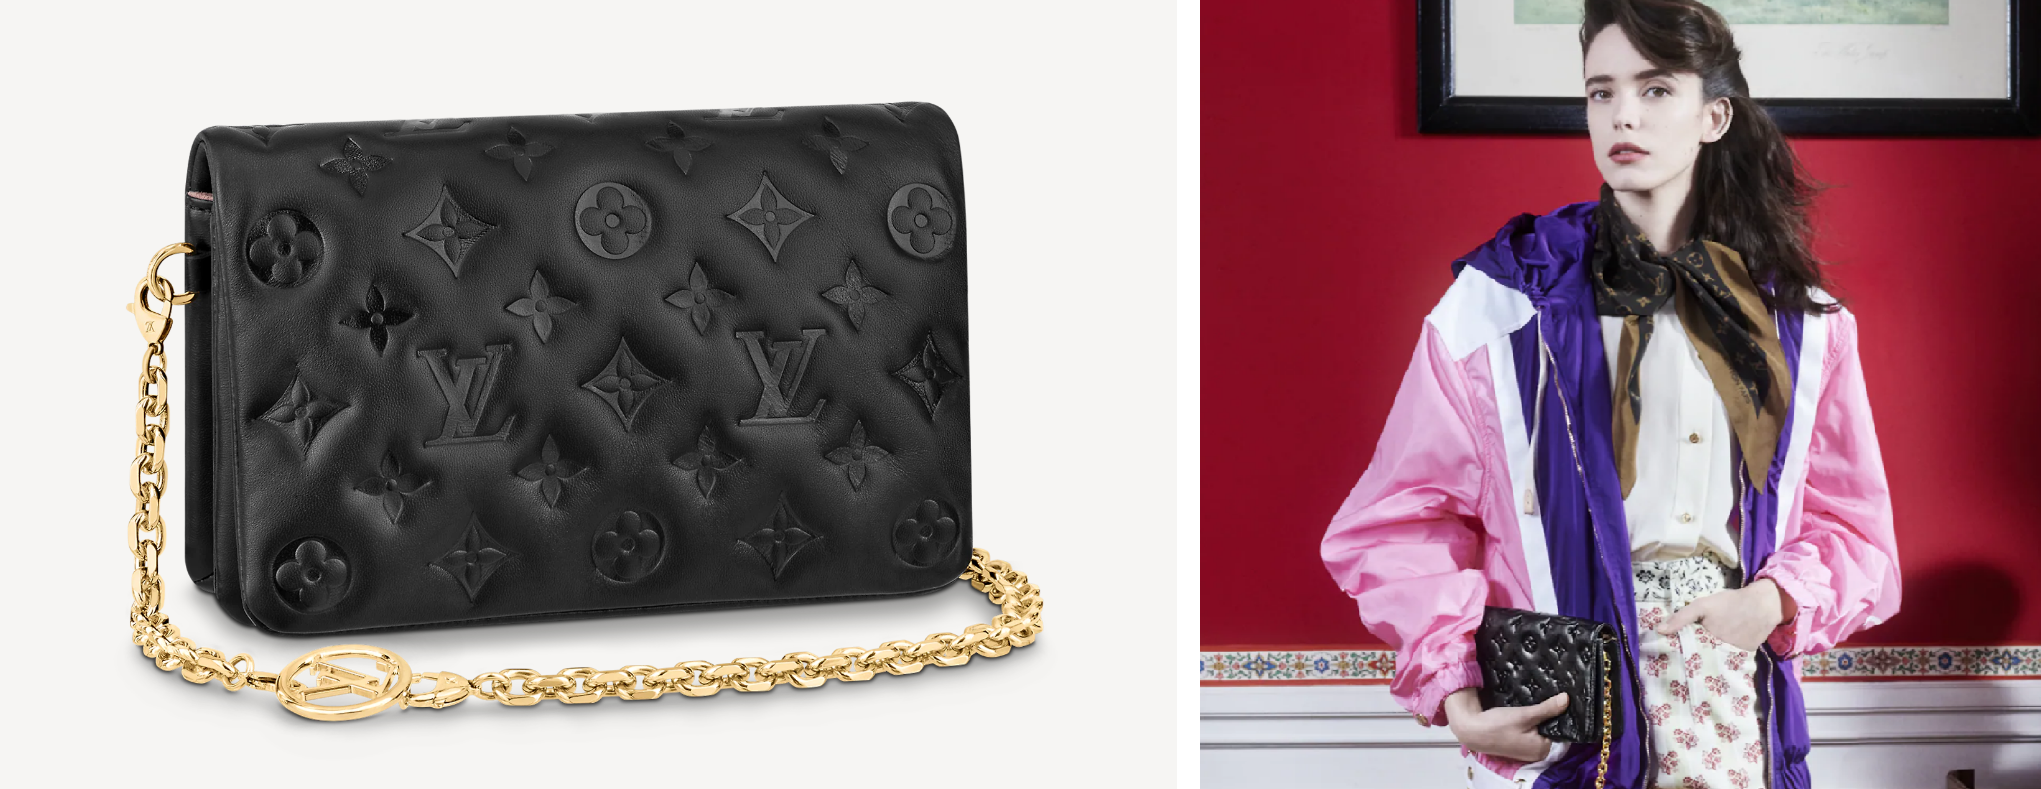 THE NEW LOUIS VUITTON COUSSIN BAG 2021  THE NEW HOT IT BAG 🔥 * Is It  Worth It? My Overall Thoughts 